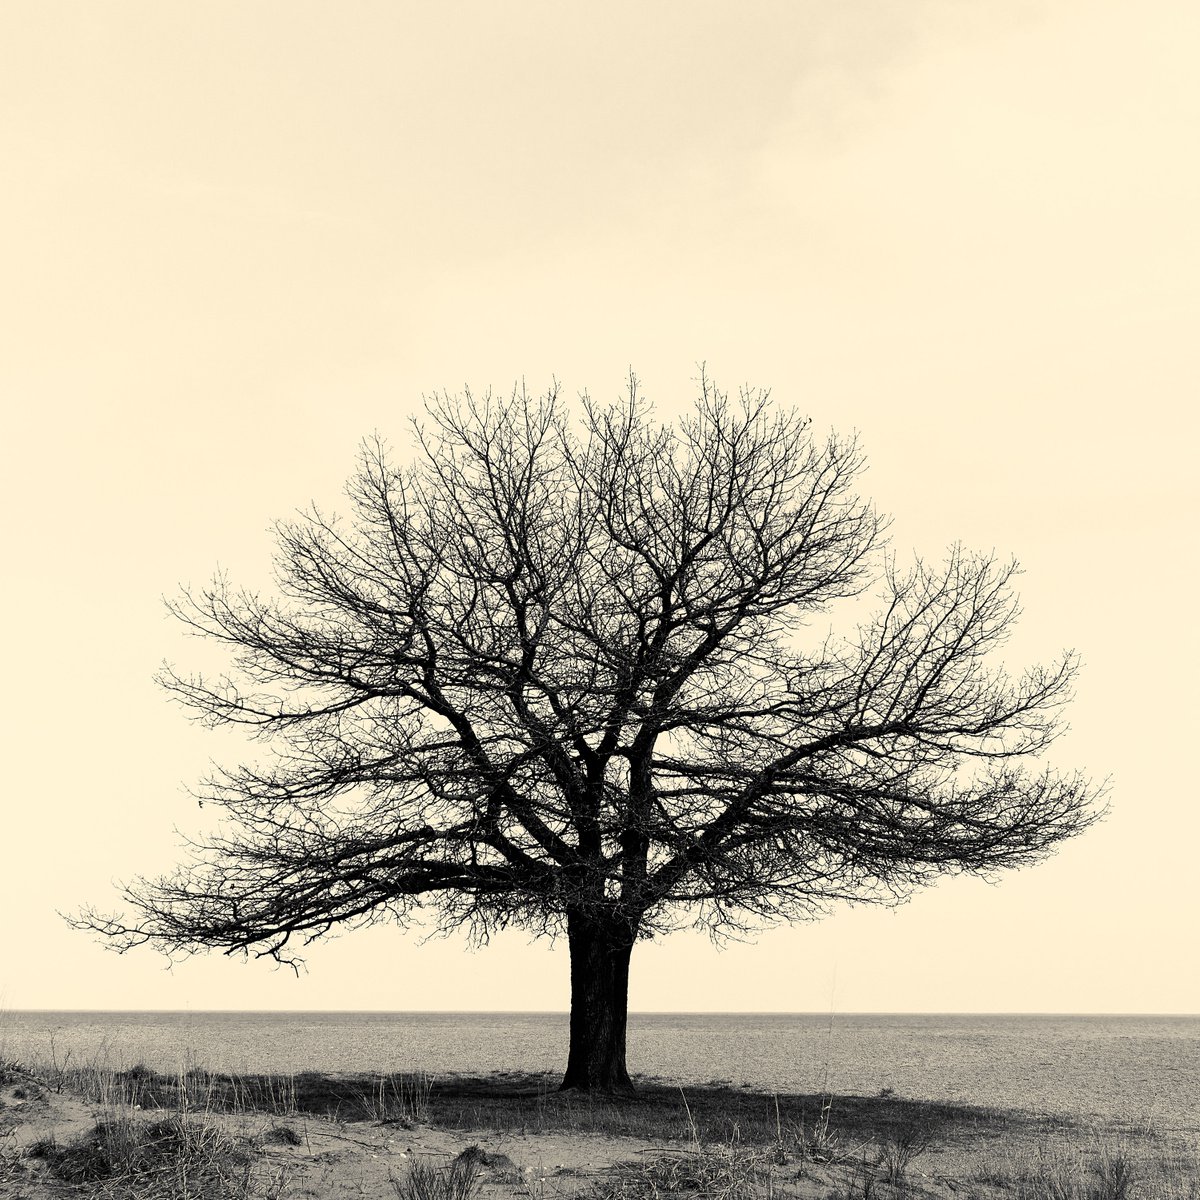 Sometimes a Tree is Just a Tree by Robert Tolchin